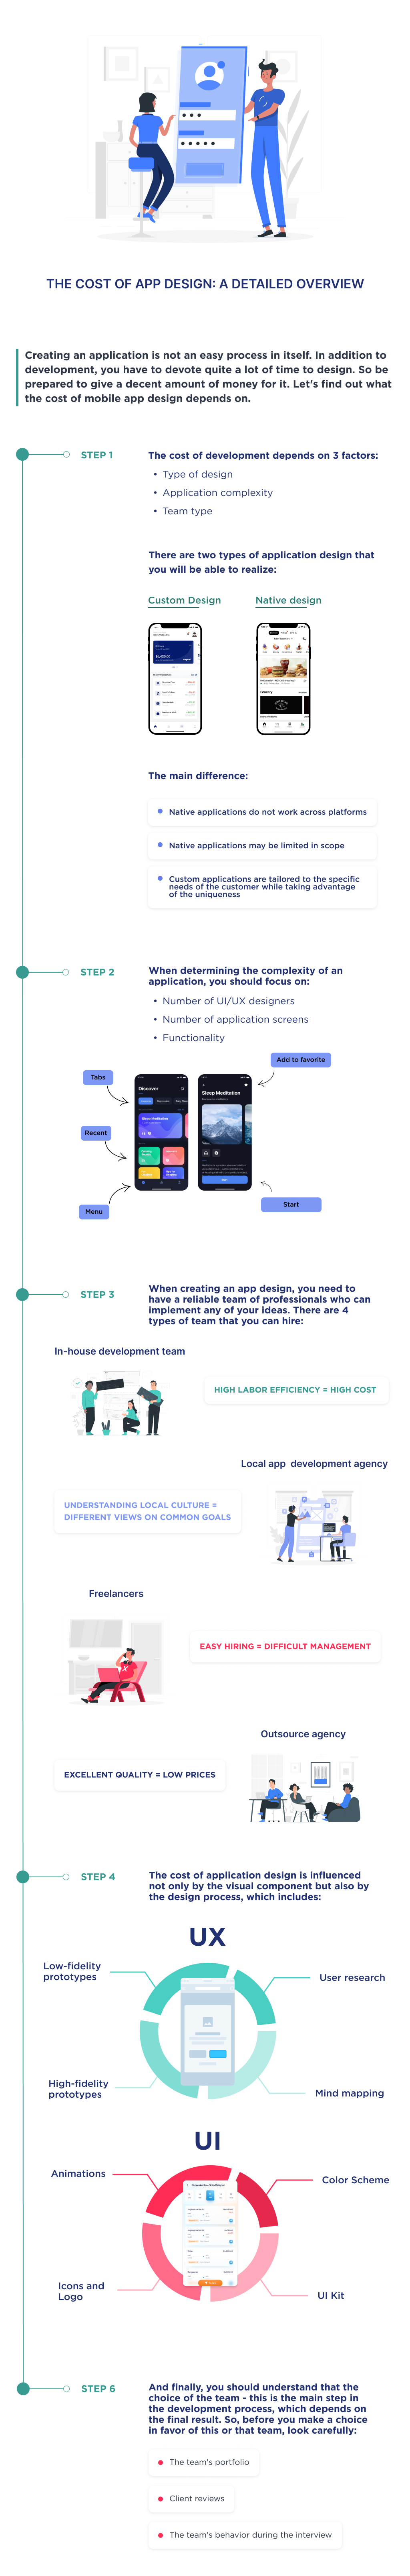 This infographic shows detailed steps to help determine the correct mobile app design cost